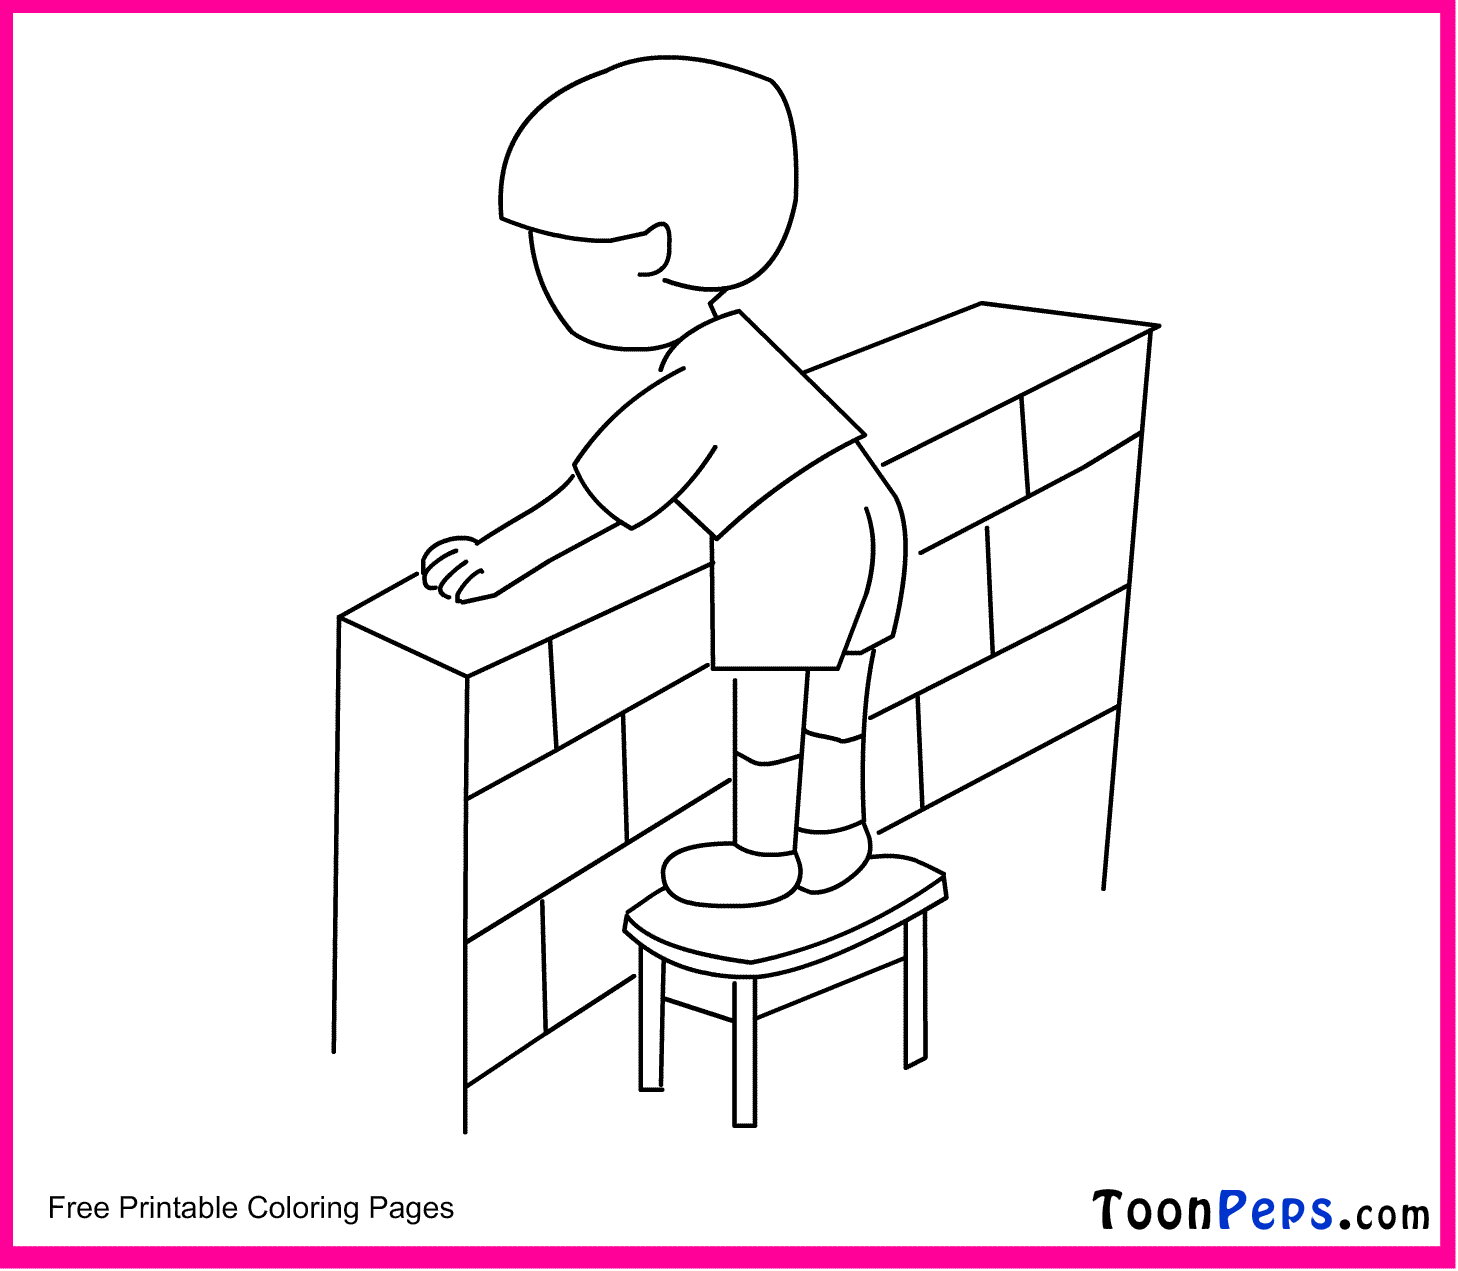 Toonpeps : Free Printable Wall coloring pages for kids